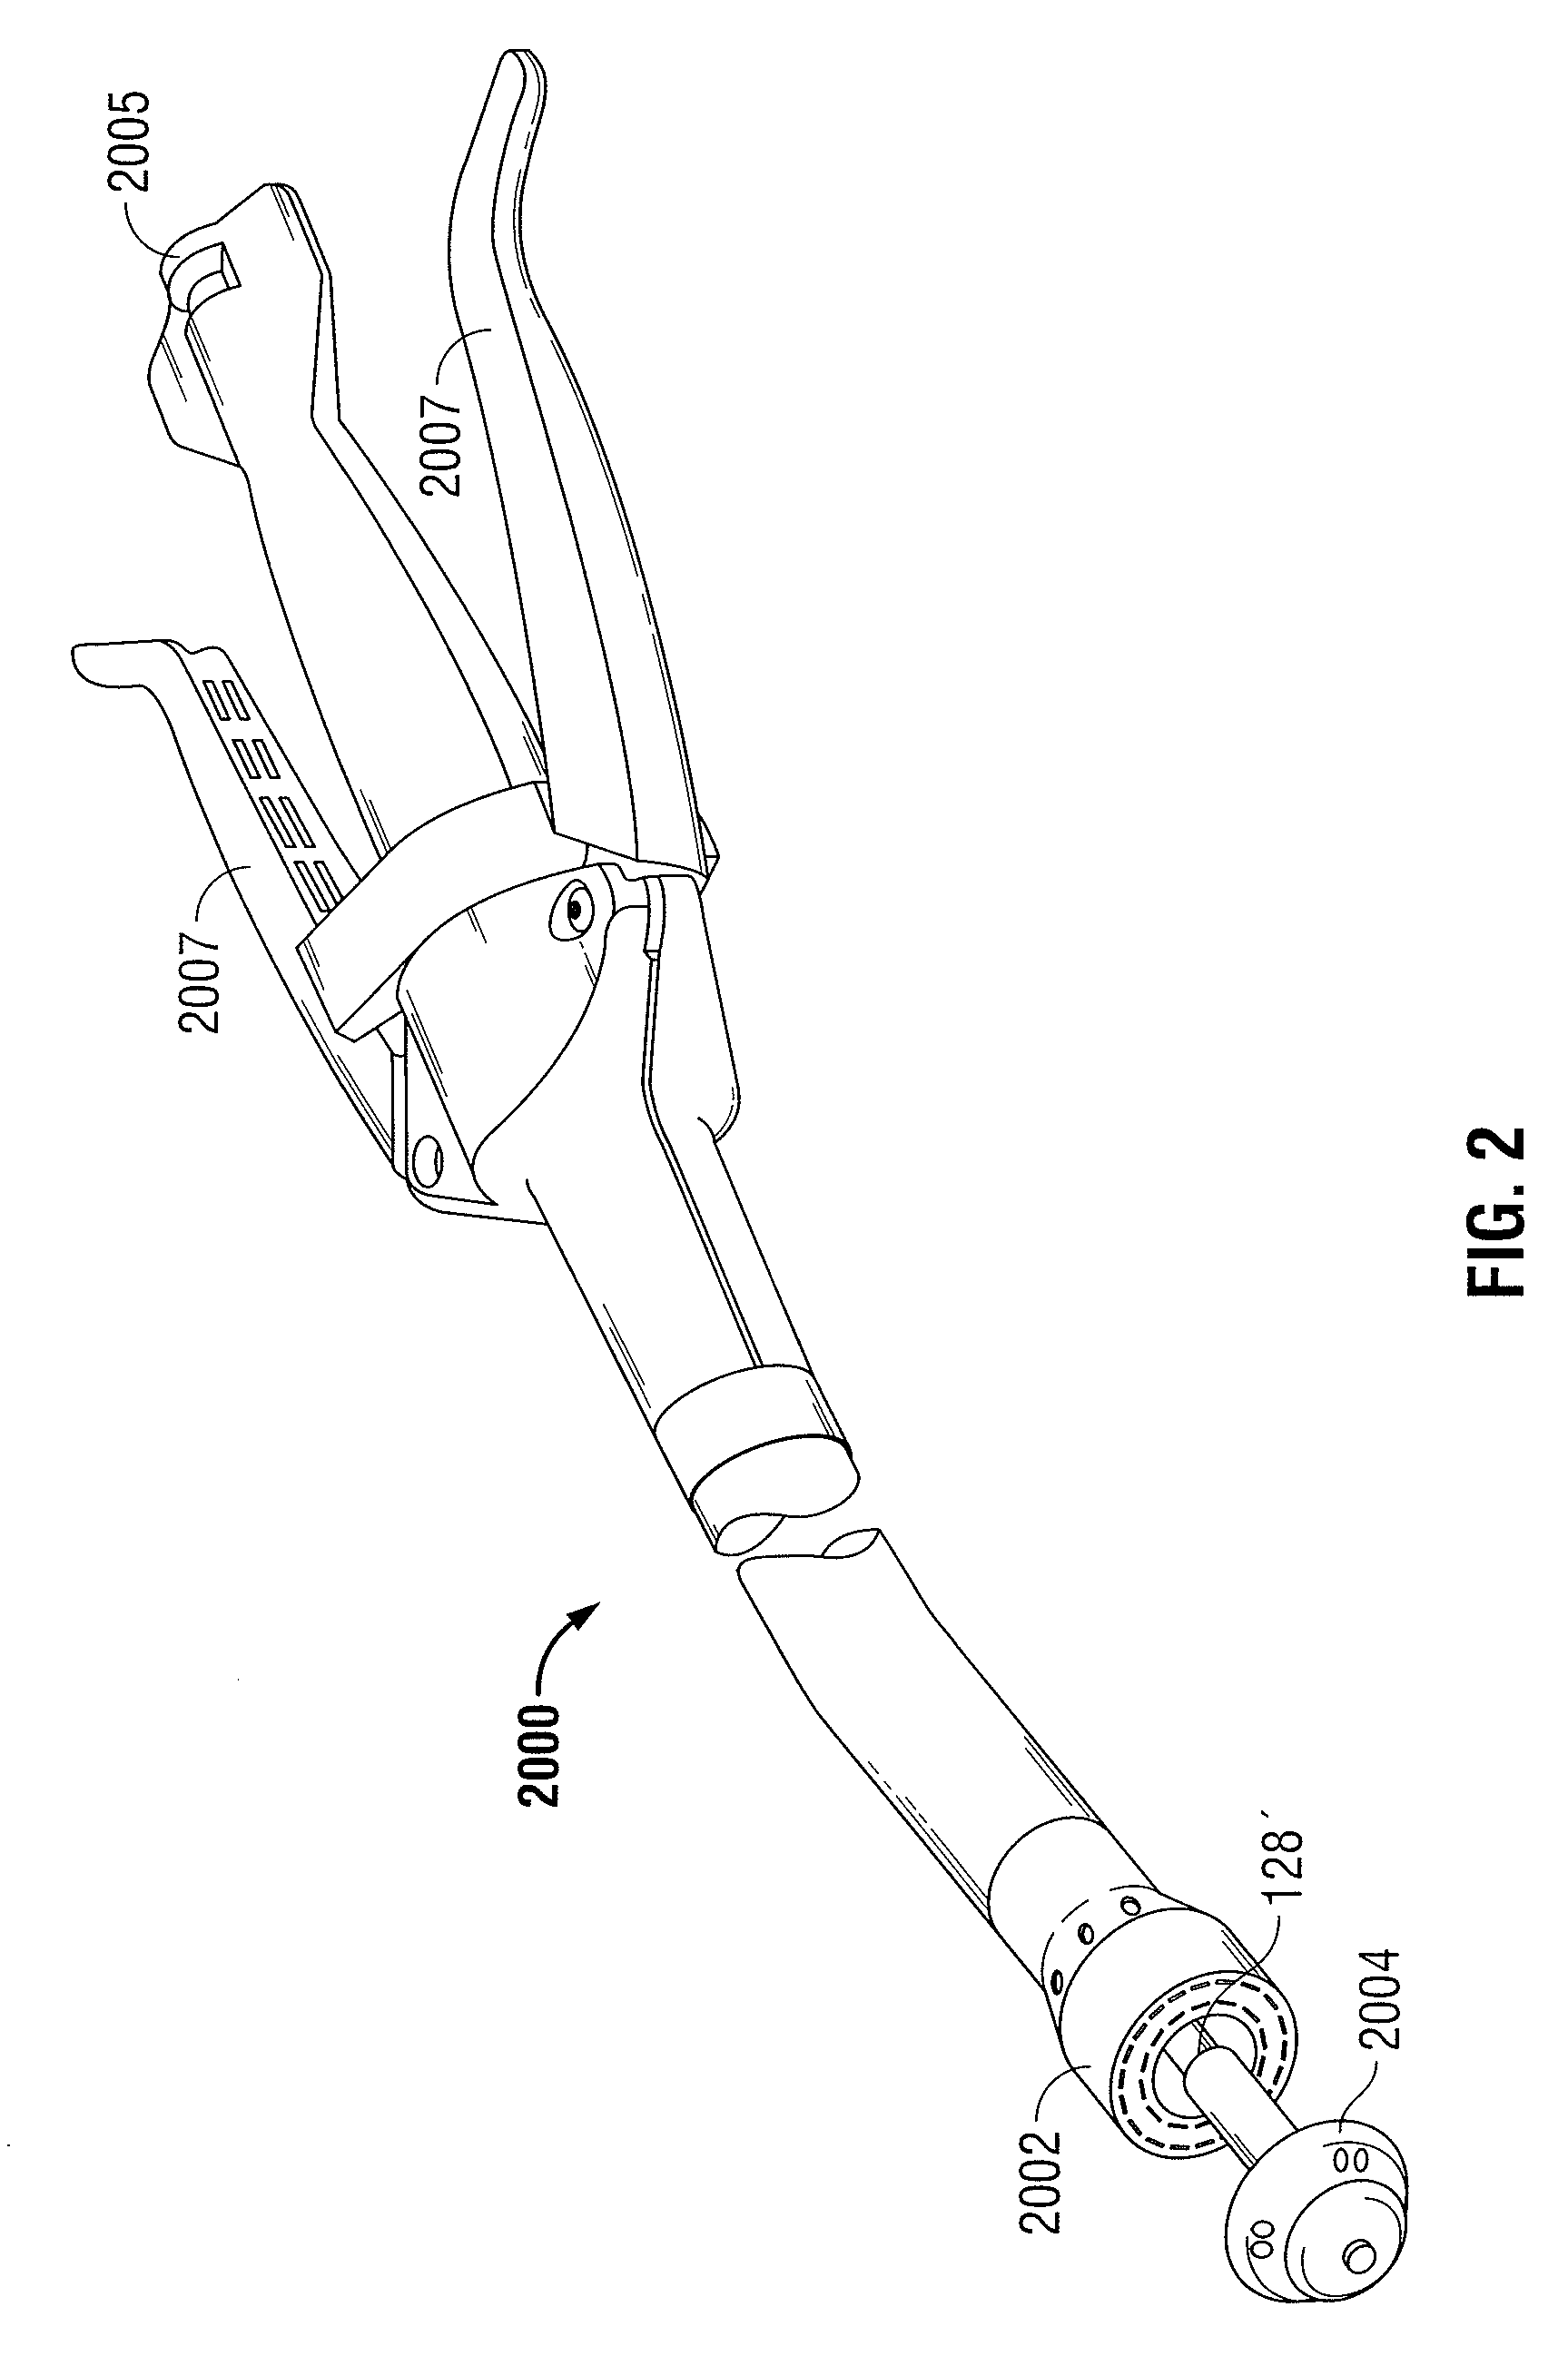 Variable compression surgical fastener apparatus